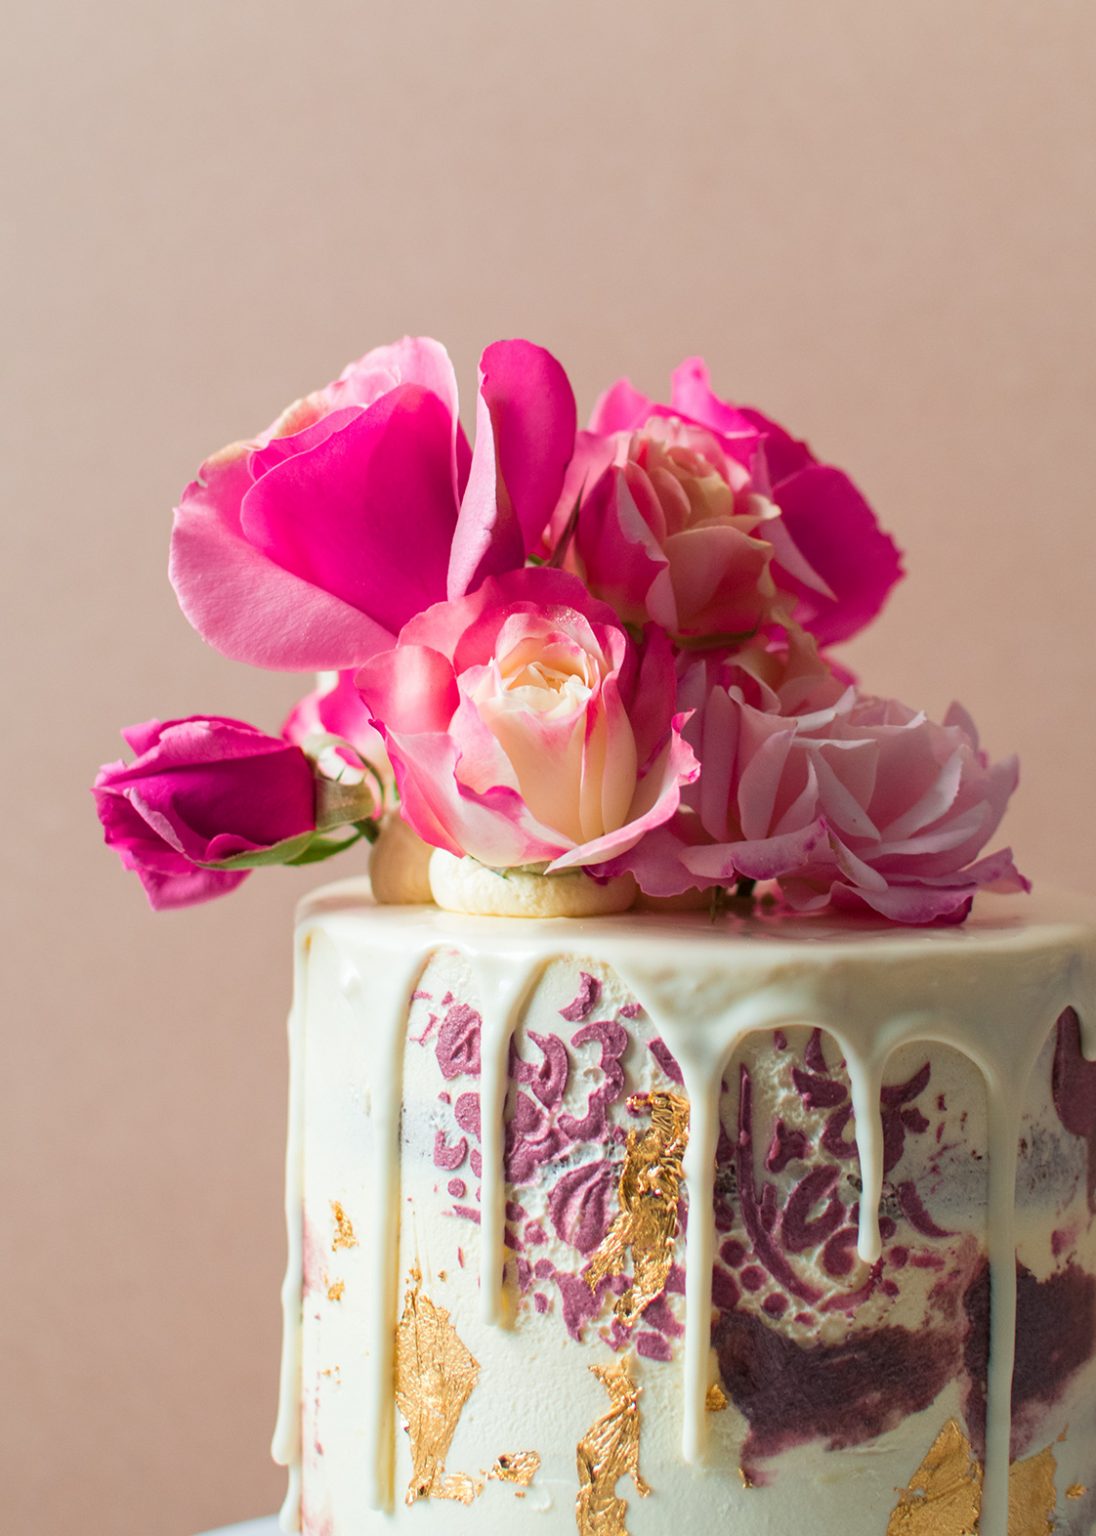 A close up image of a vintage cake with flowers on top